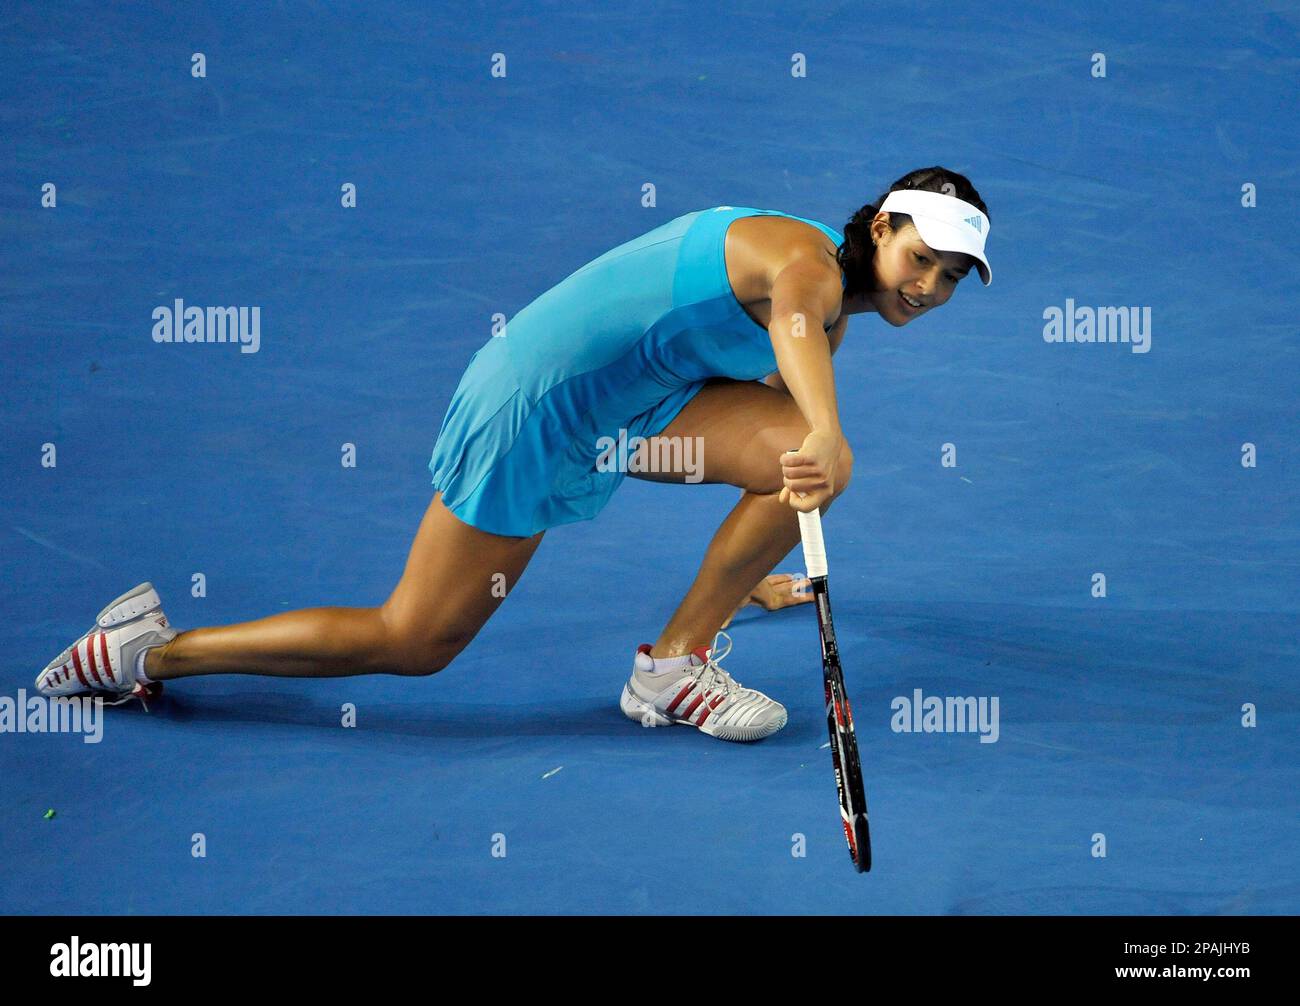 Serbia's Ana Ivanovic gets back on to her feet as she plays Katarina Srebotnik of Slovenia in a Women's singles third round match at the Australian Open tennis championships in Melbourne, Australia, Saturday, Jan. 19, 2008.(AP Photo/Andrew Brownbill) Stock Photo